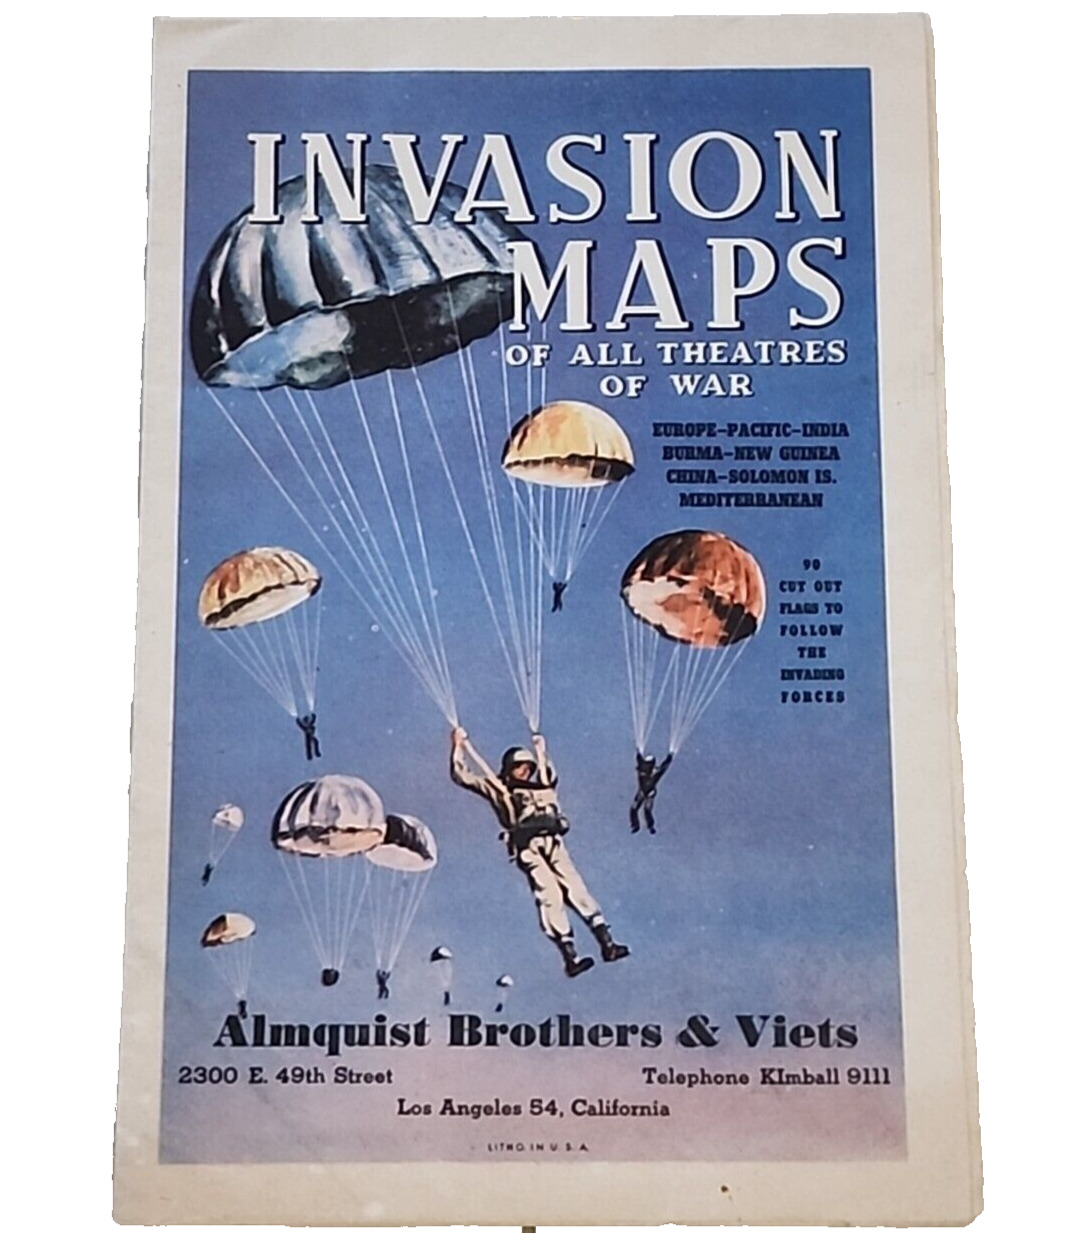 1940 Hammond Invasion Maps of all Theaters of War WWII RRP53